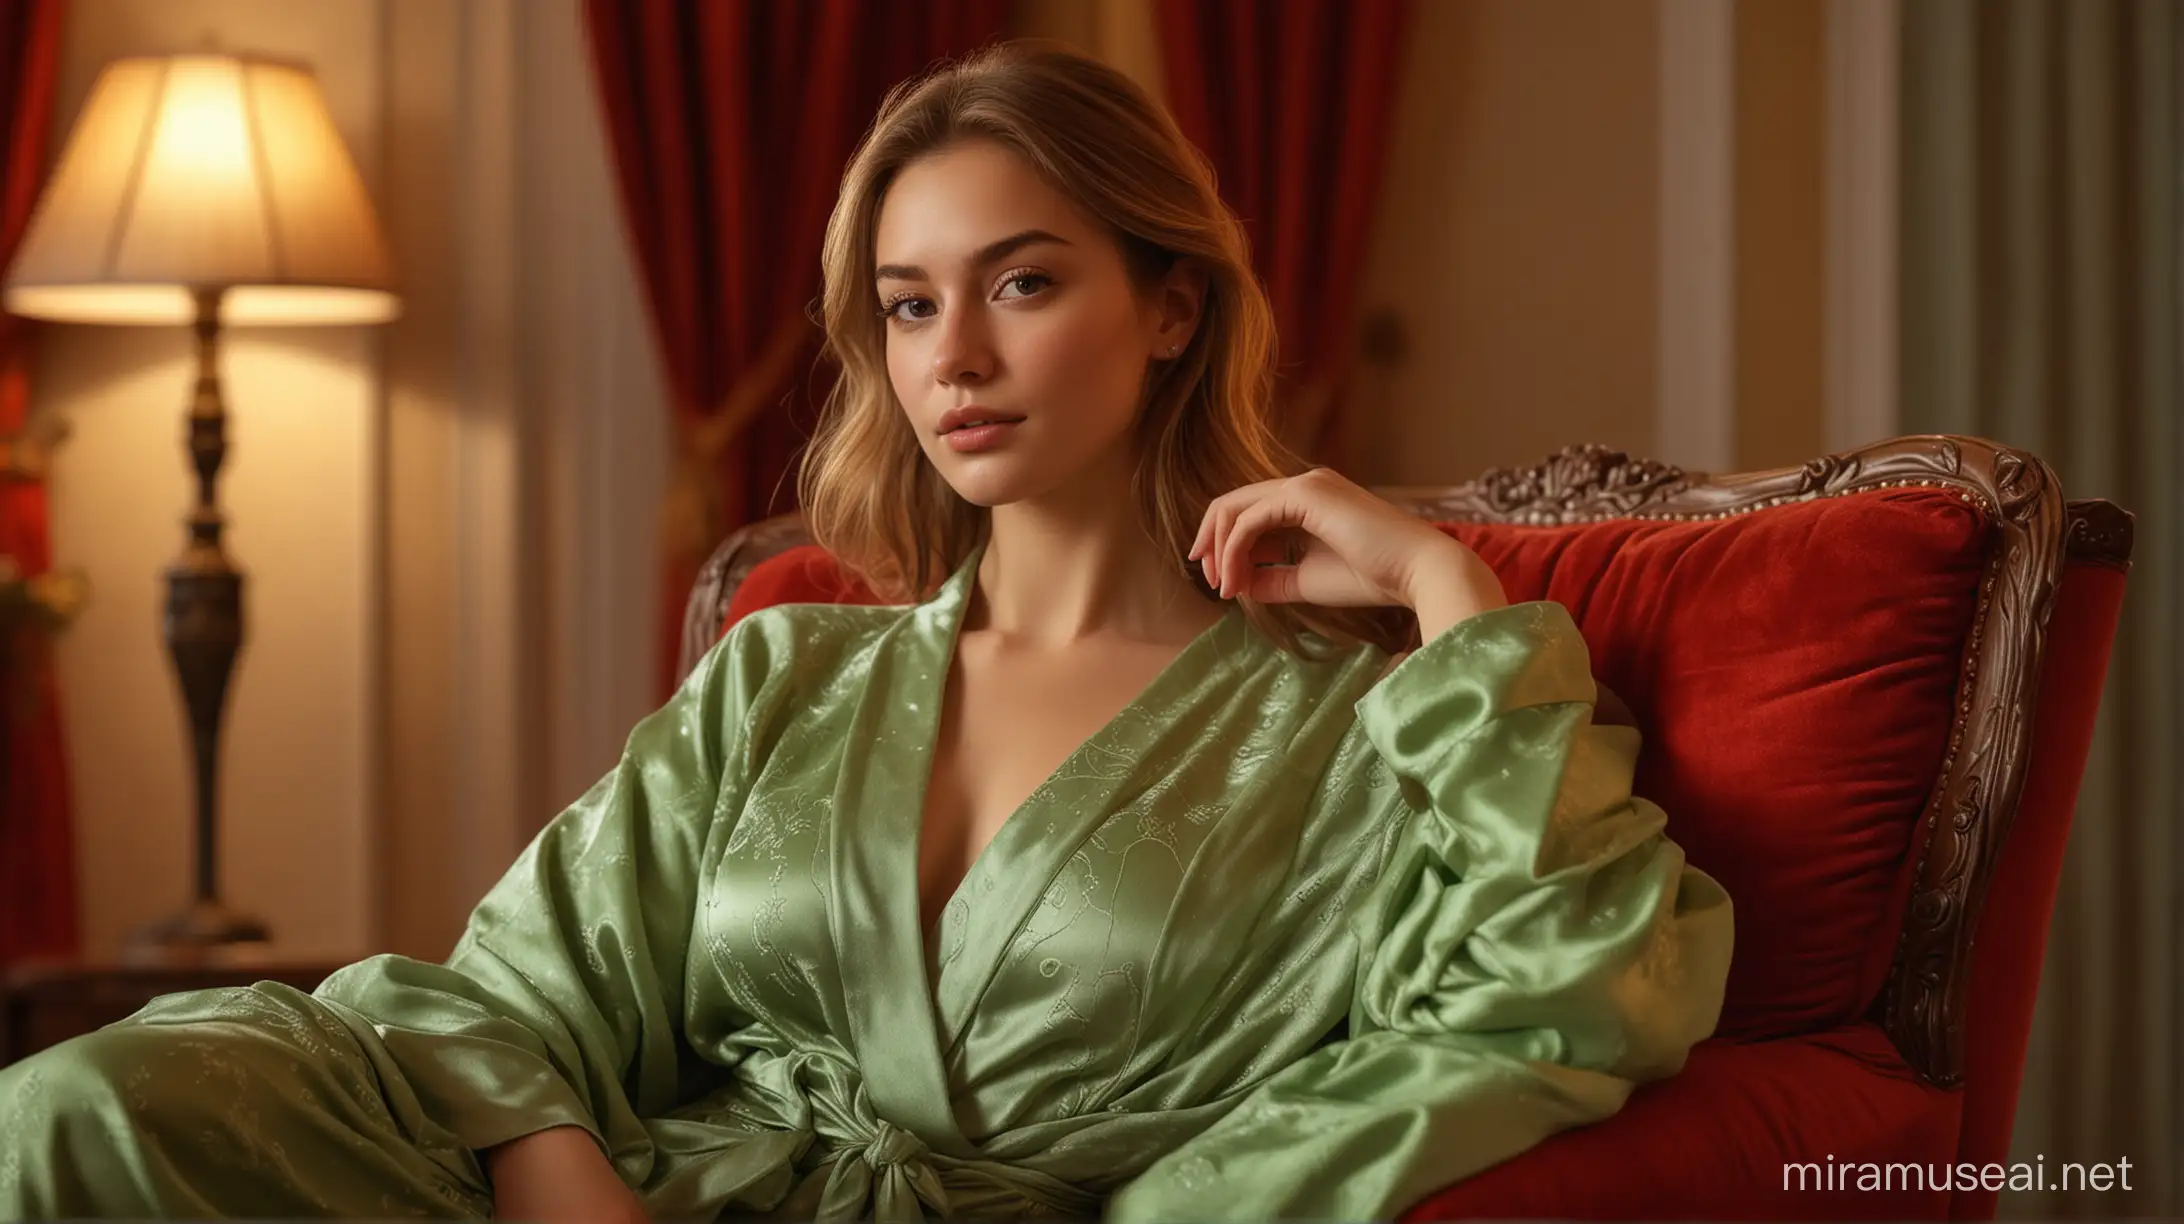 Elegant Young Woman in Light Green Robe Relaxing in a Luxurious RedLit Room